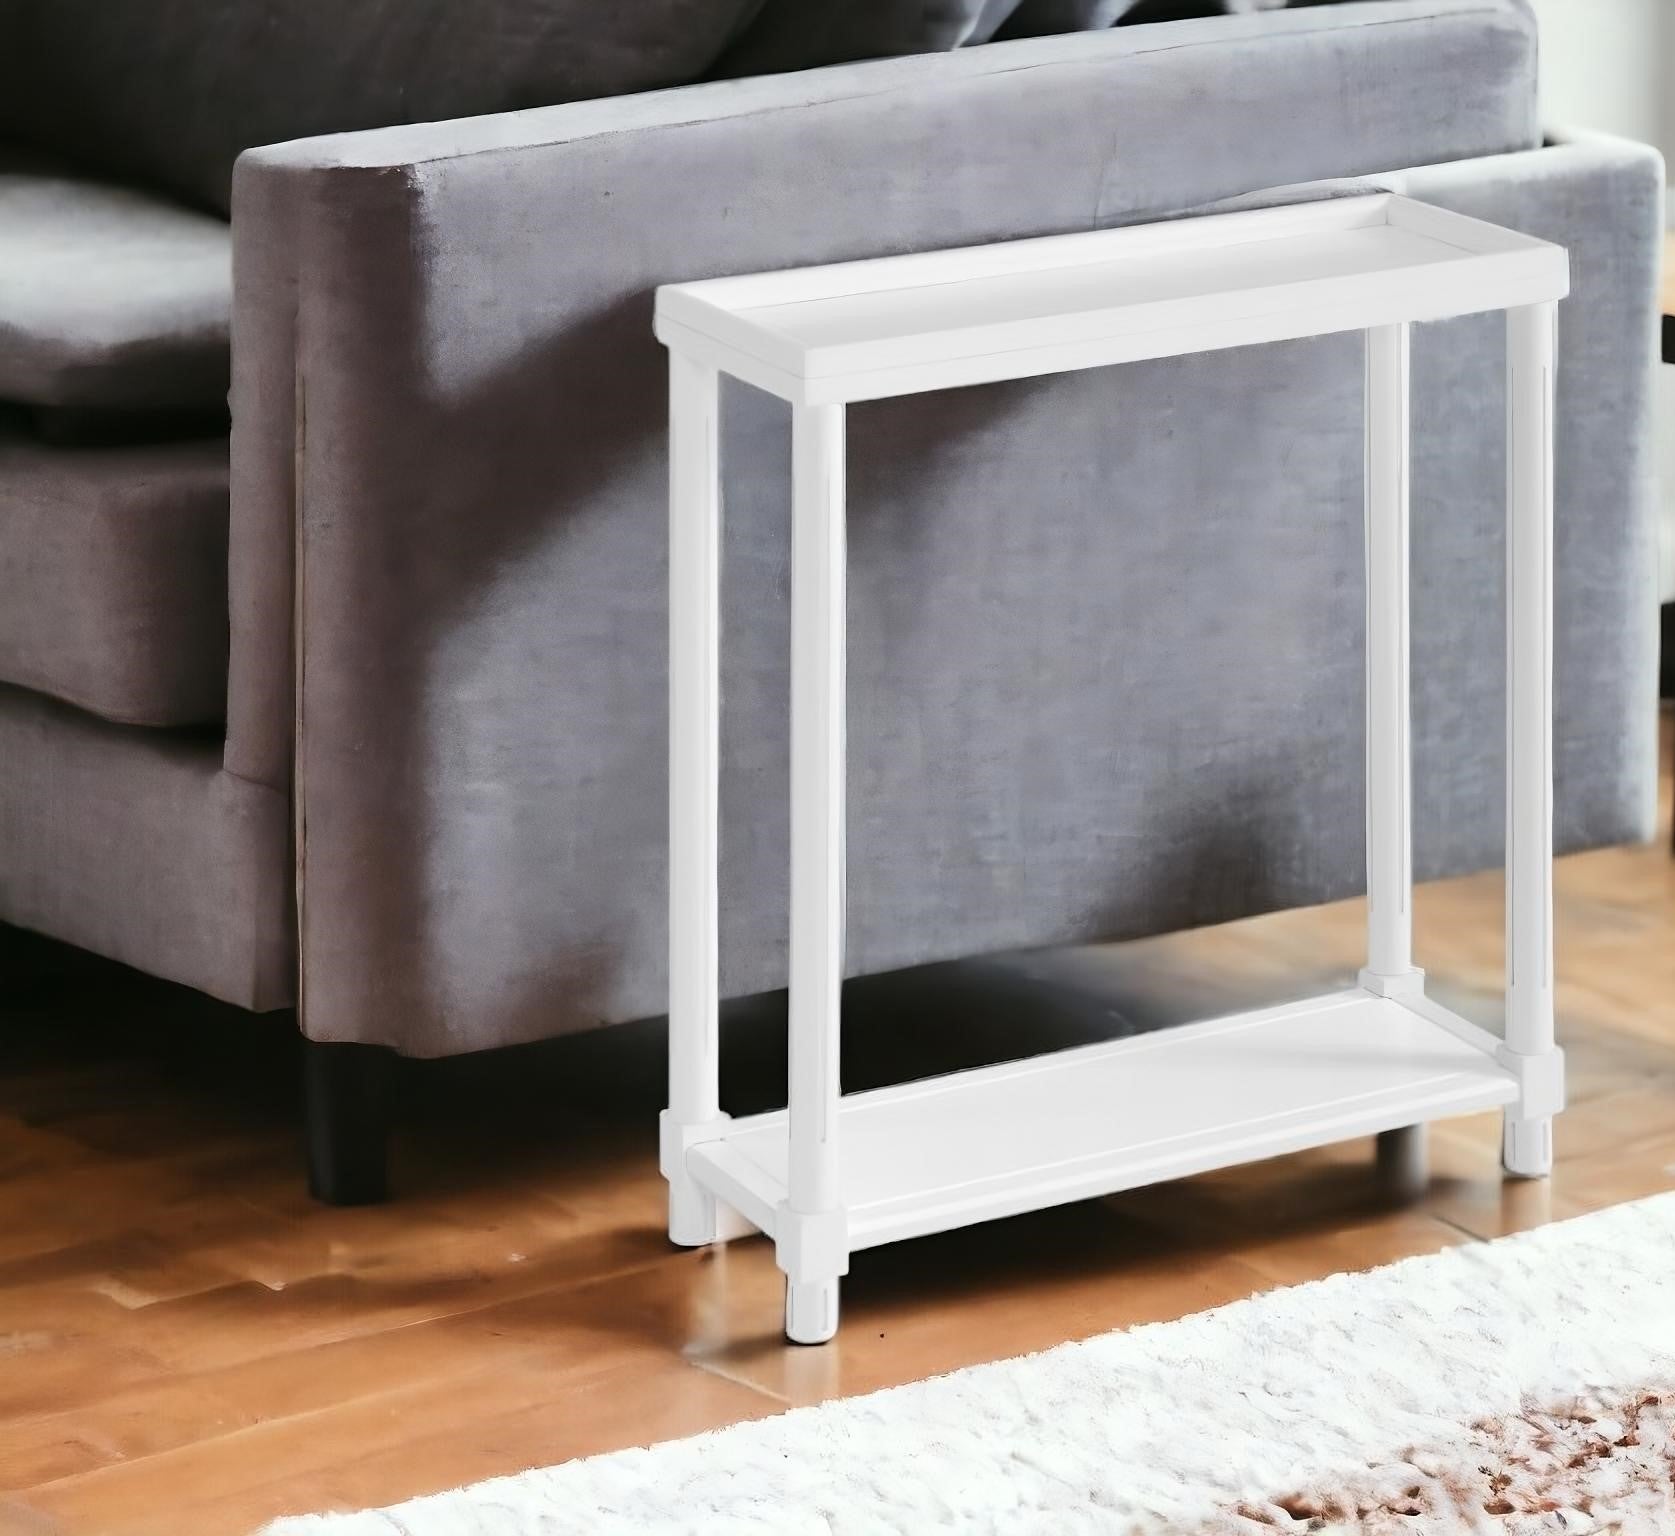 Set Of Two 24" White Wood Rectangular End Tables With Shelf